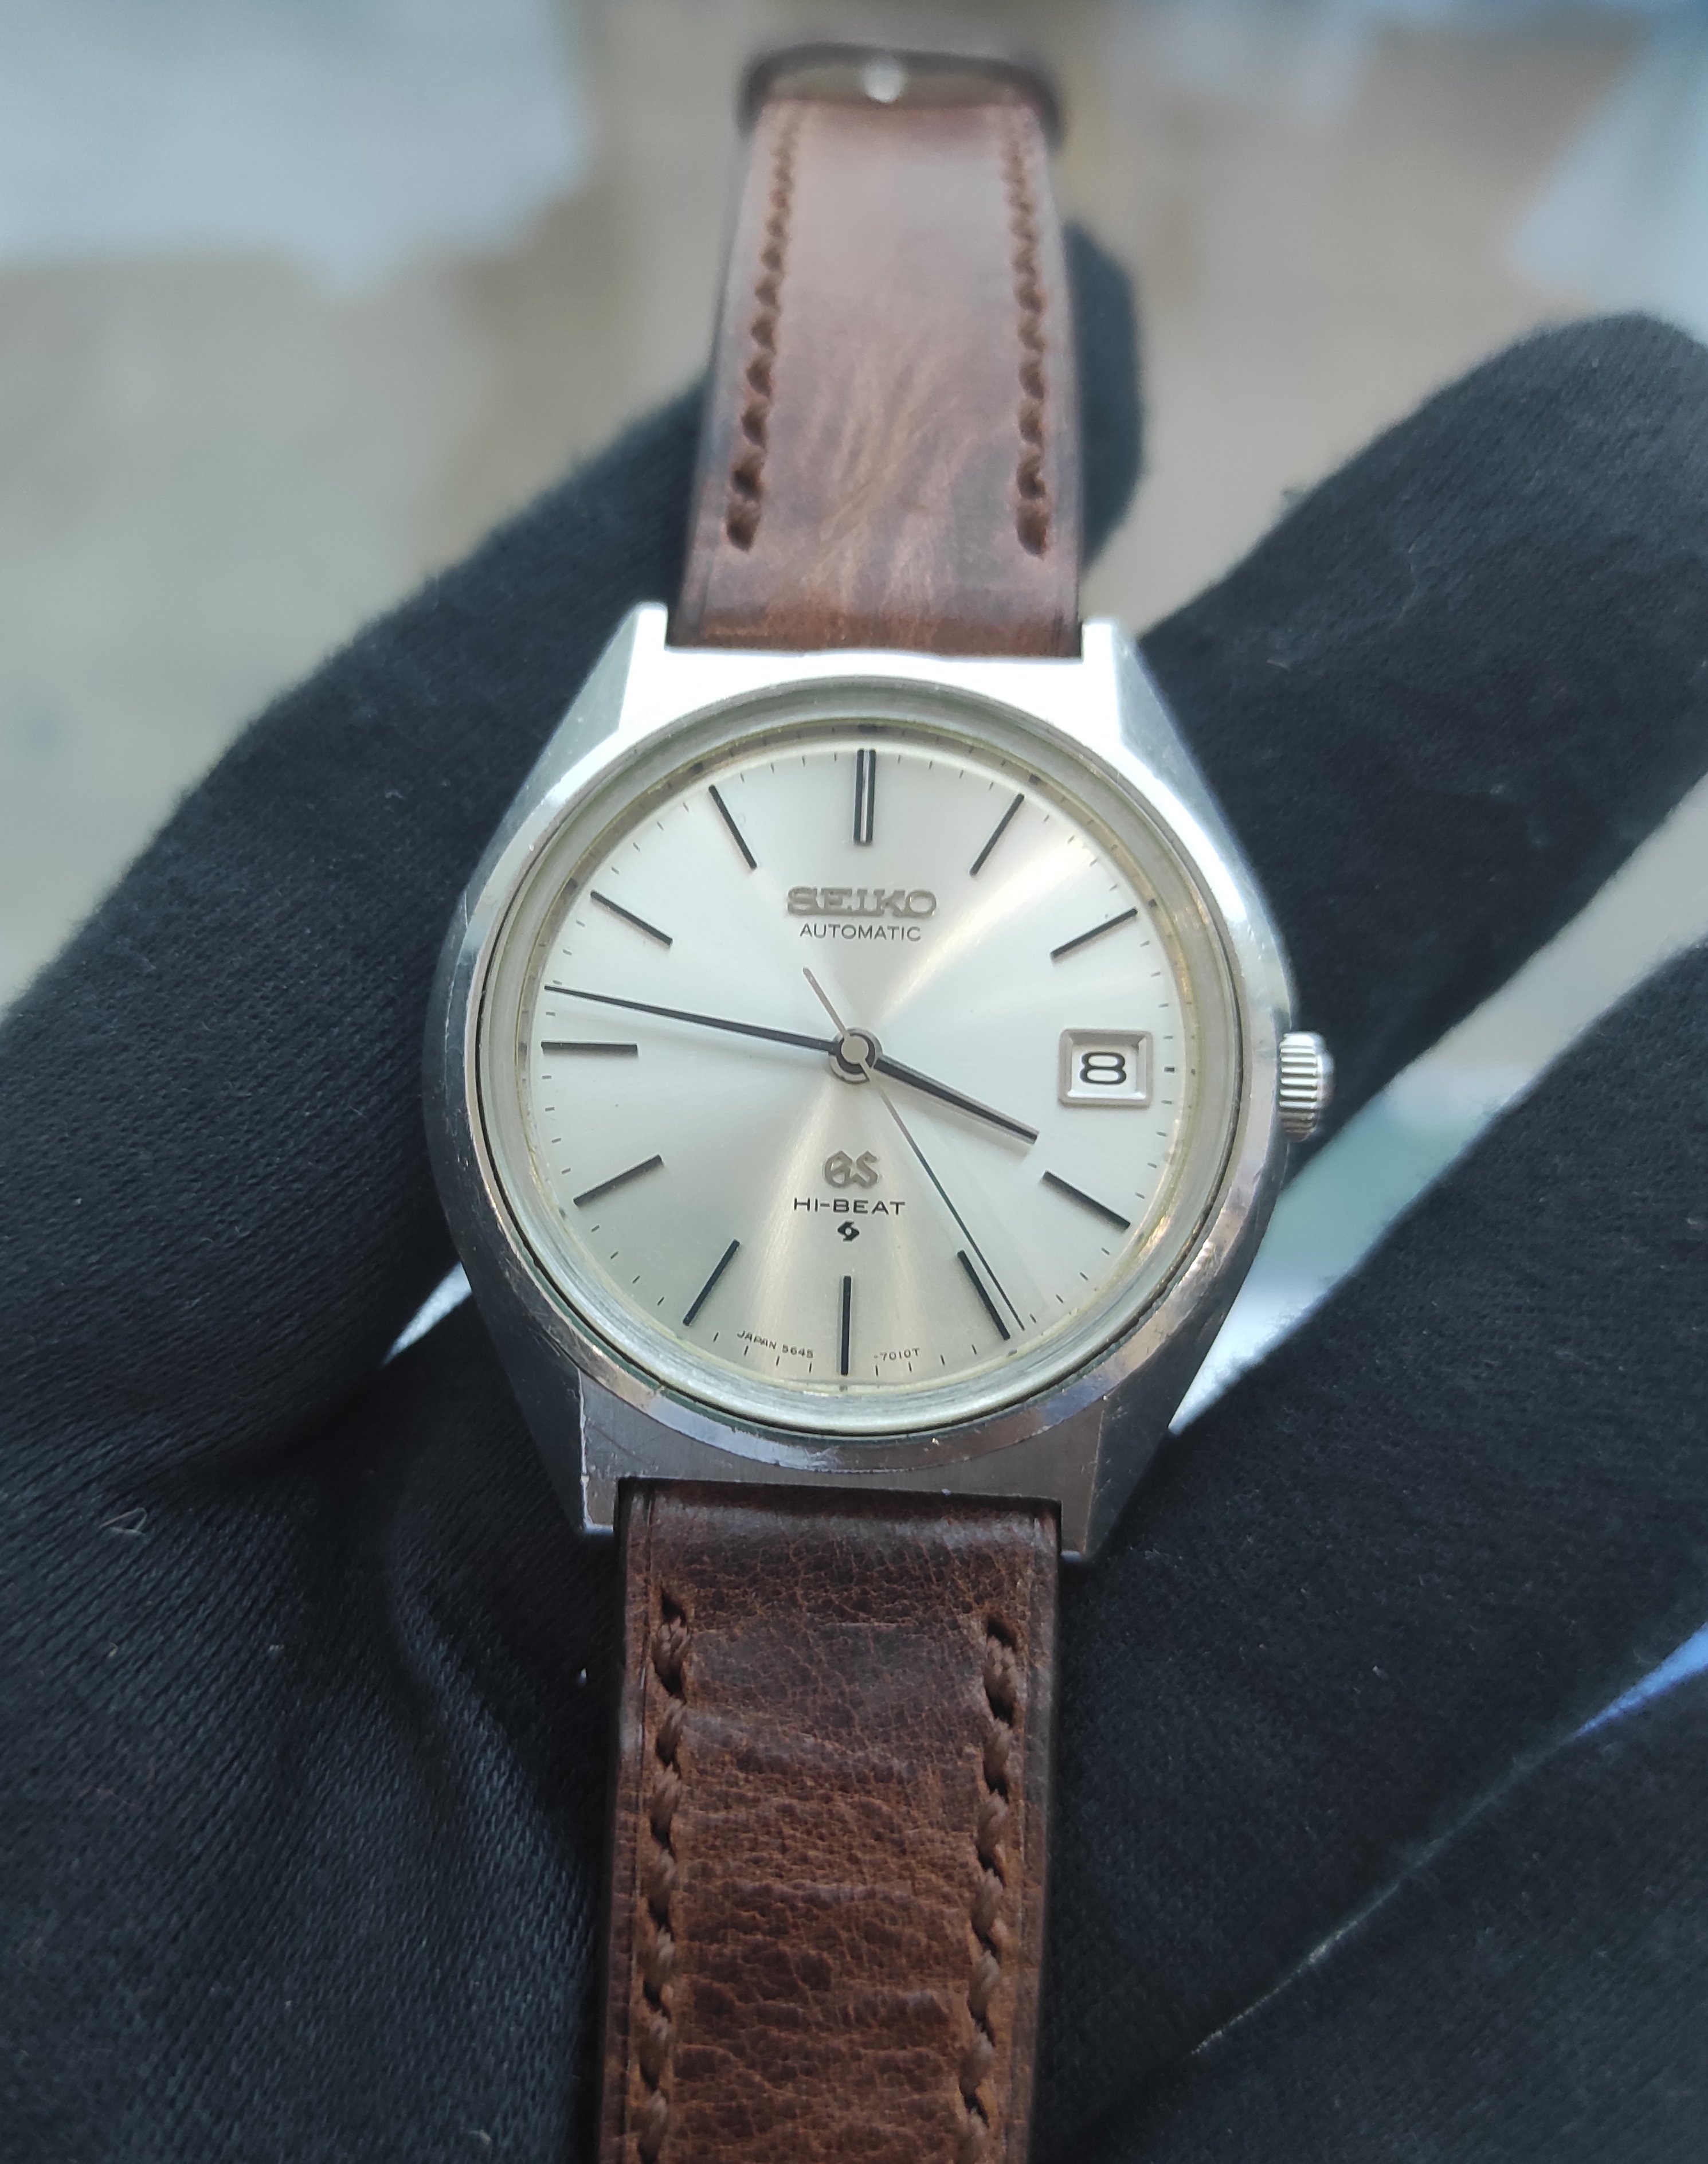 620 USD] FOR SALE: Grand Seiko 5645-7010 of June,1971 | WatchCharts